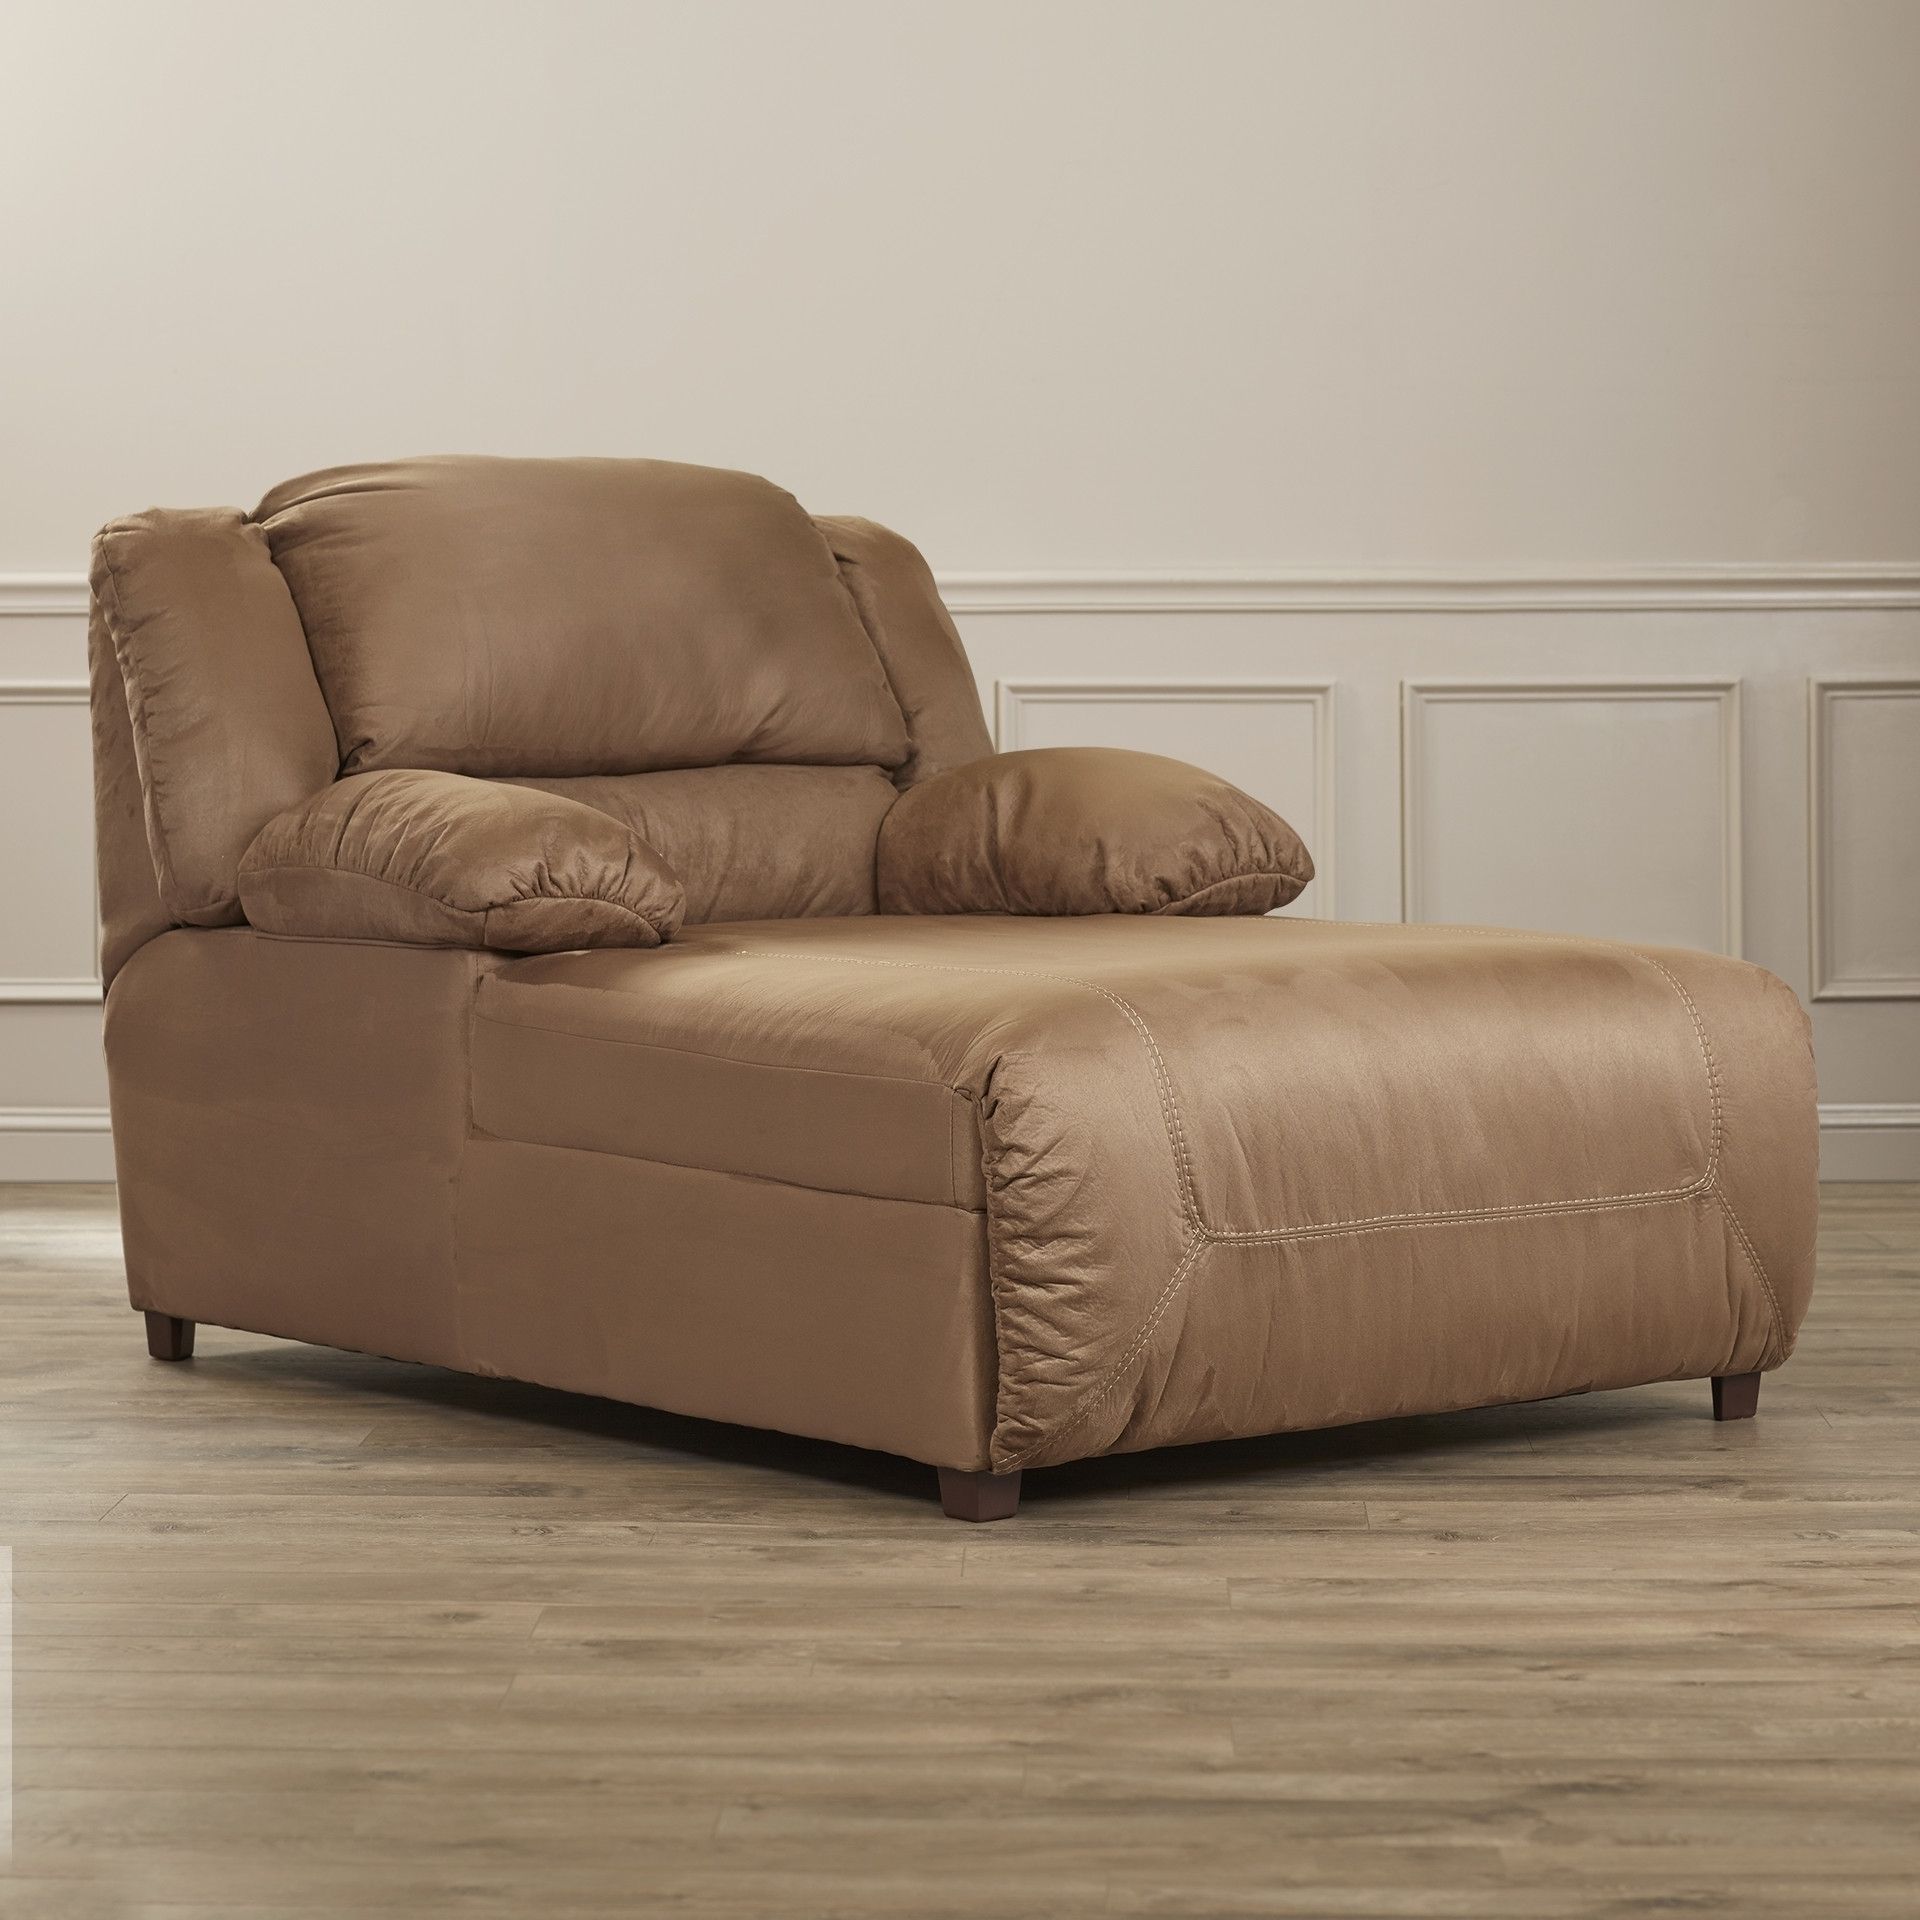 Uncategorized : Microfiber Chaise Lounge With Glorious Ultimate Pertaining To Fashionable Microfiber Chaise Lounge Chairs (View 2 of 15)